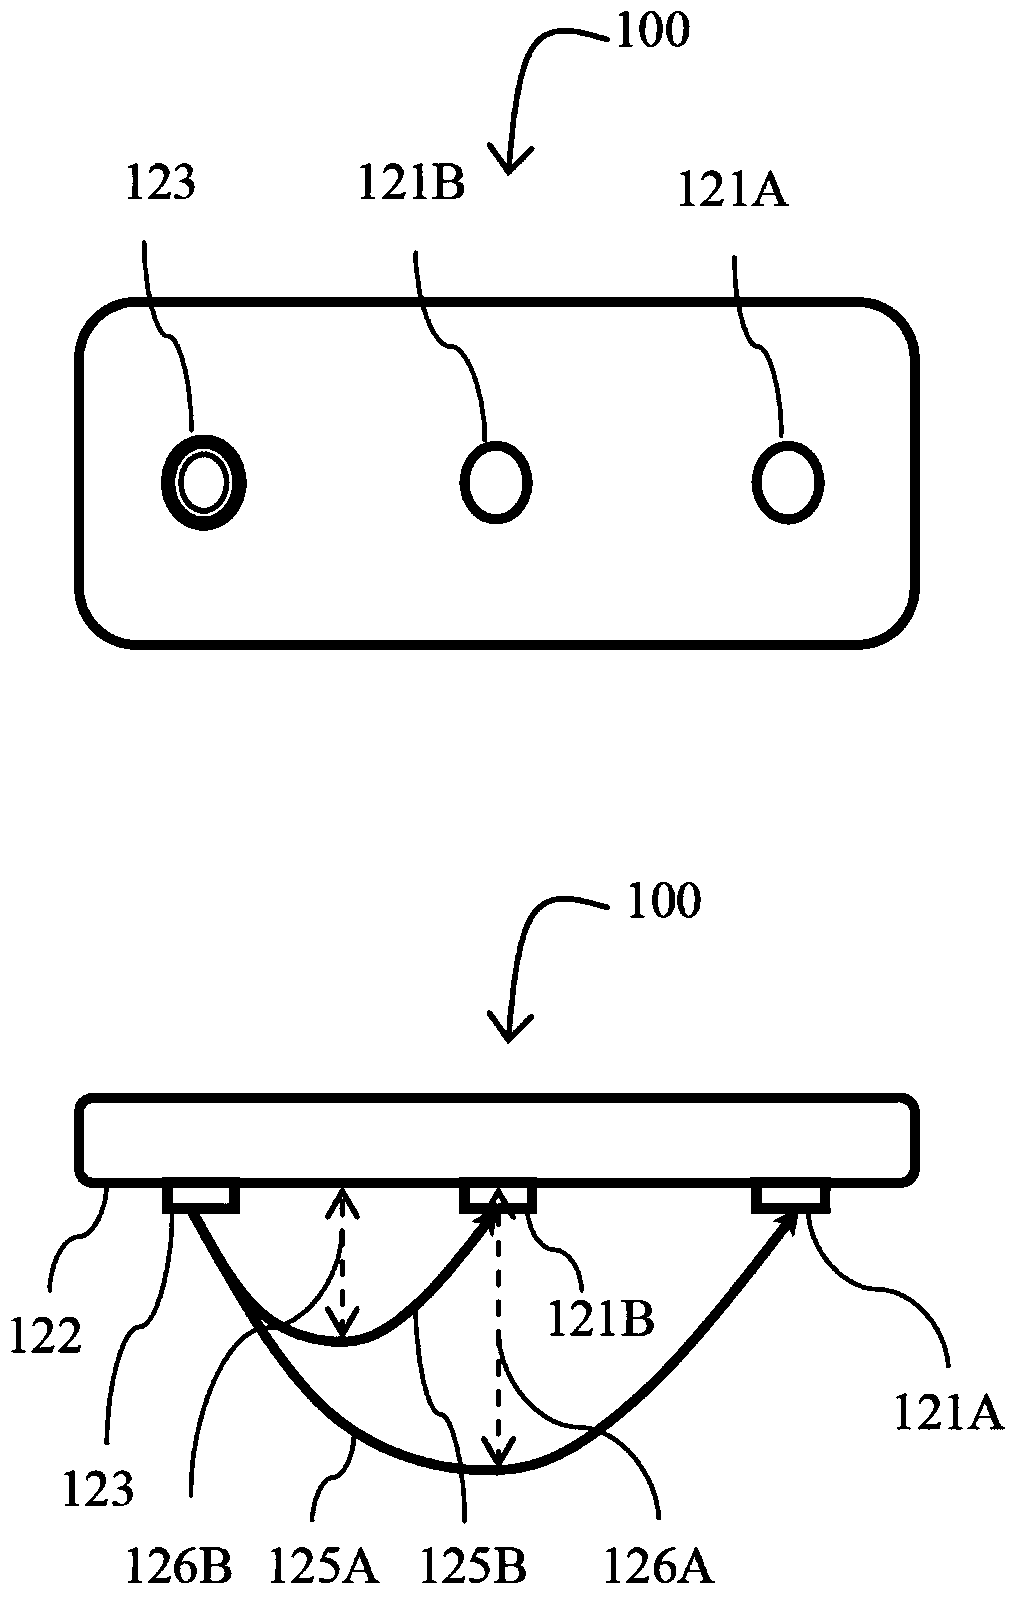 Parallel near-infrared photoelectric sensing device and system and method for detecting organs and tissue of animals